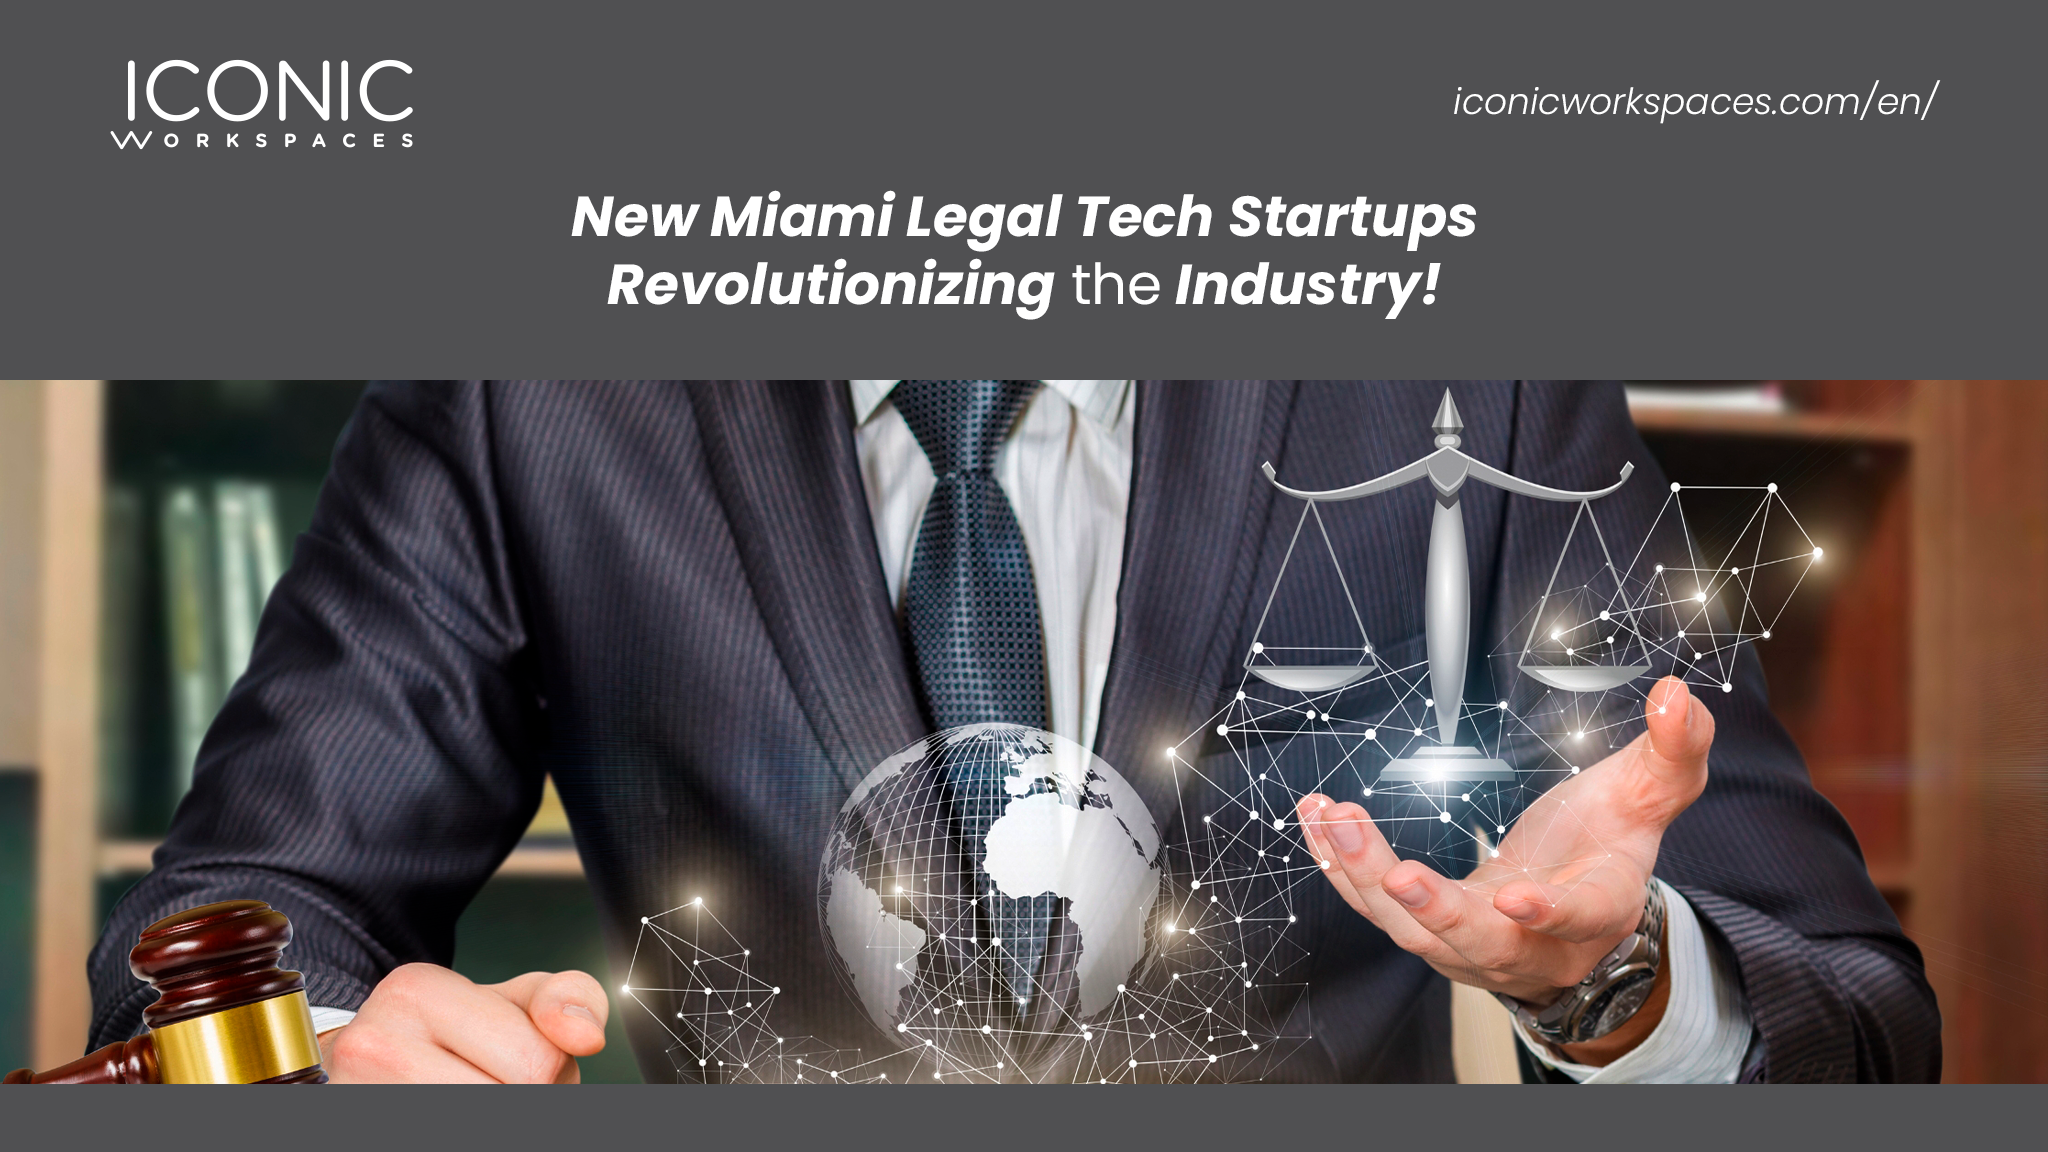 New Miami Legal Tech Startups Revolutionizing the Industry: A Glimpse into the Legal Innovation Wave